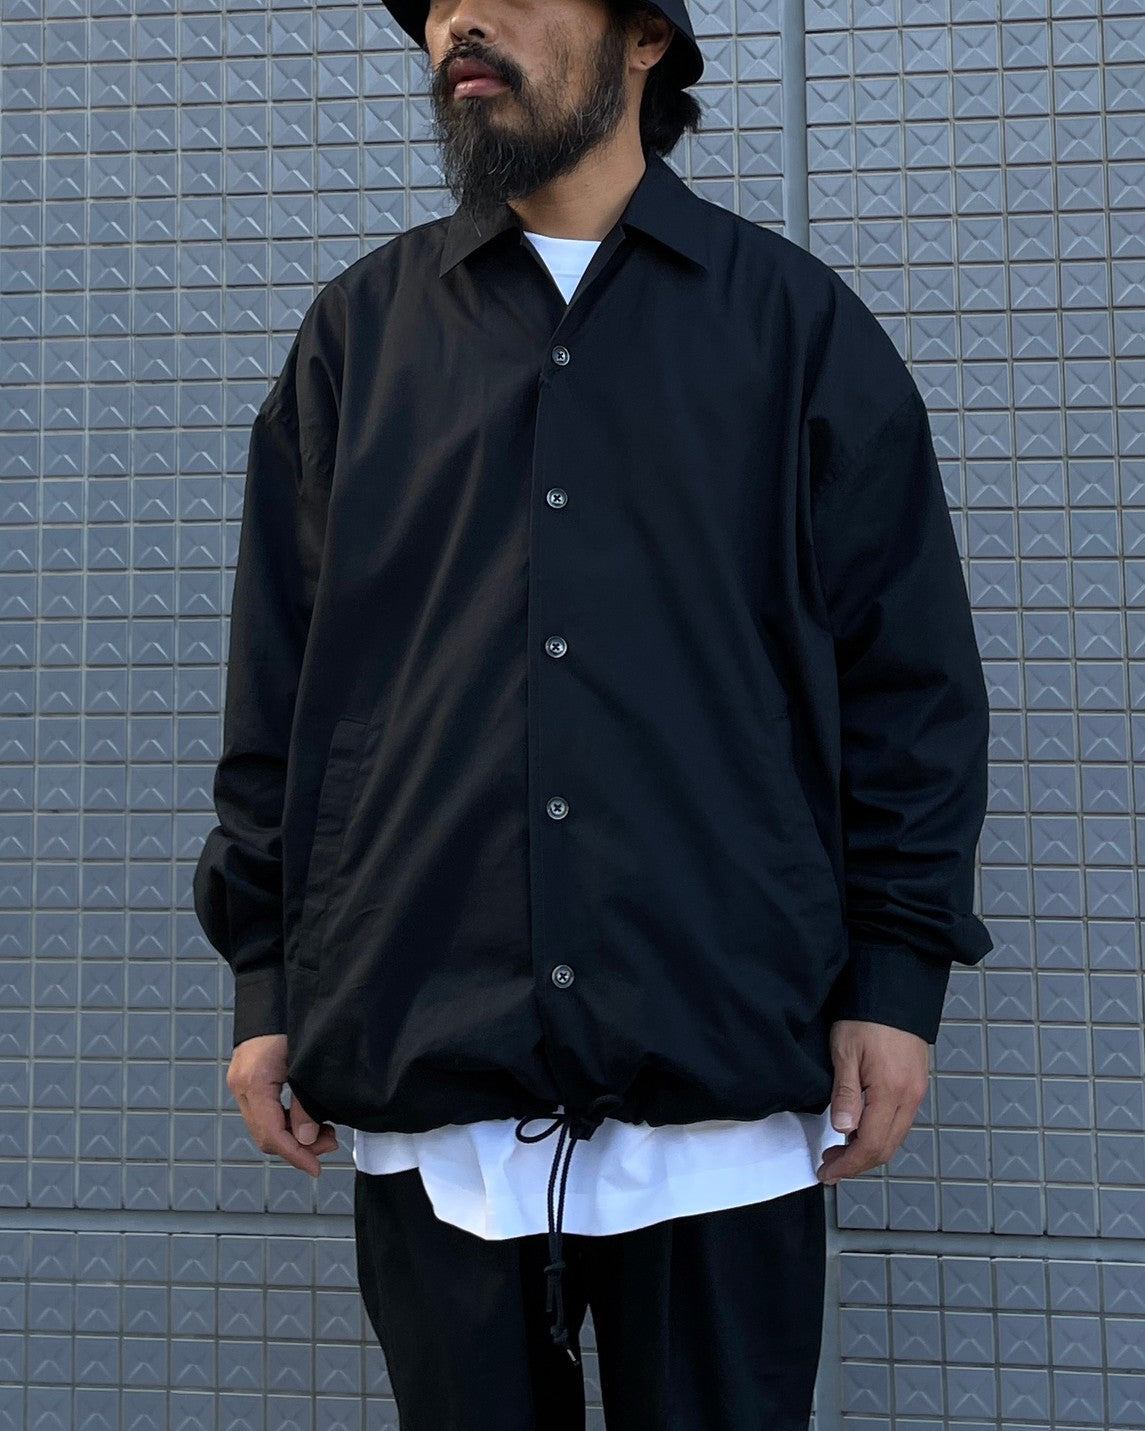 COOTIE VENTILE WEATHER CLOTH O/C JACKETおいくらでしたら可能でしょうか